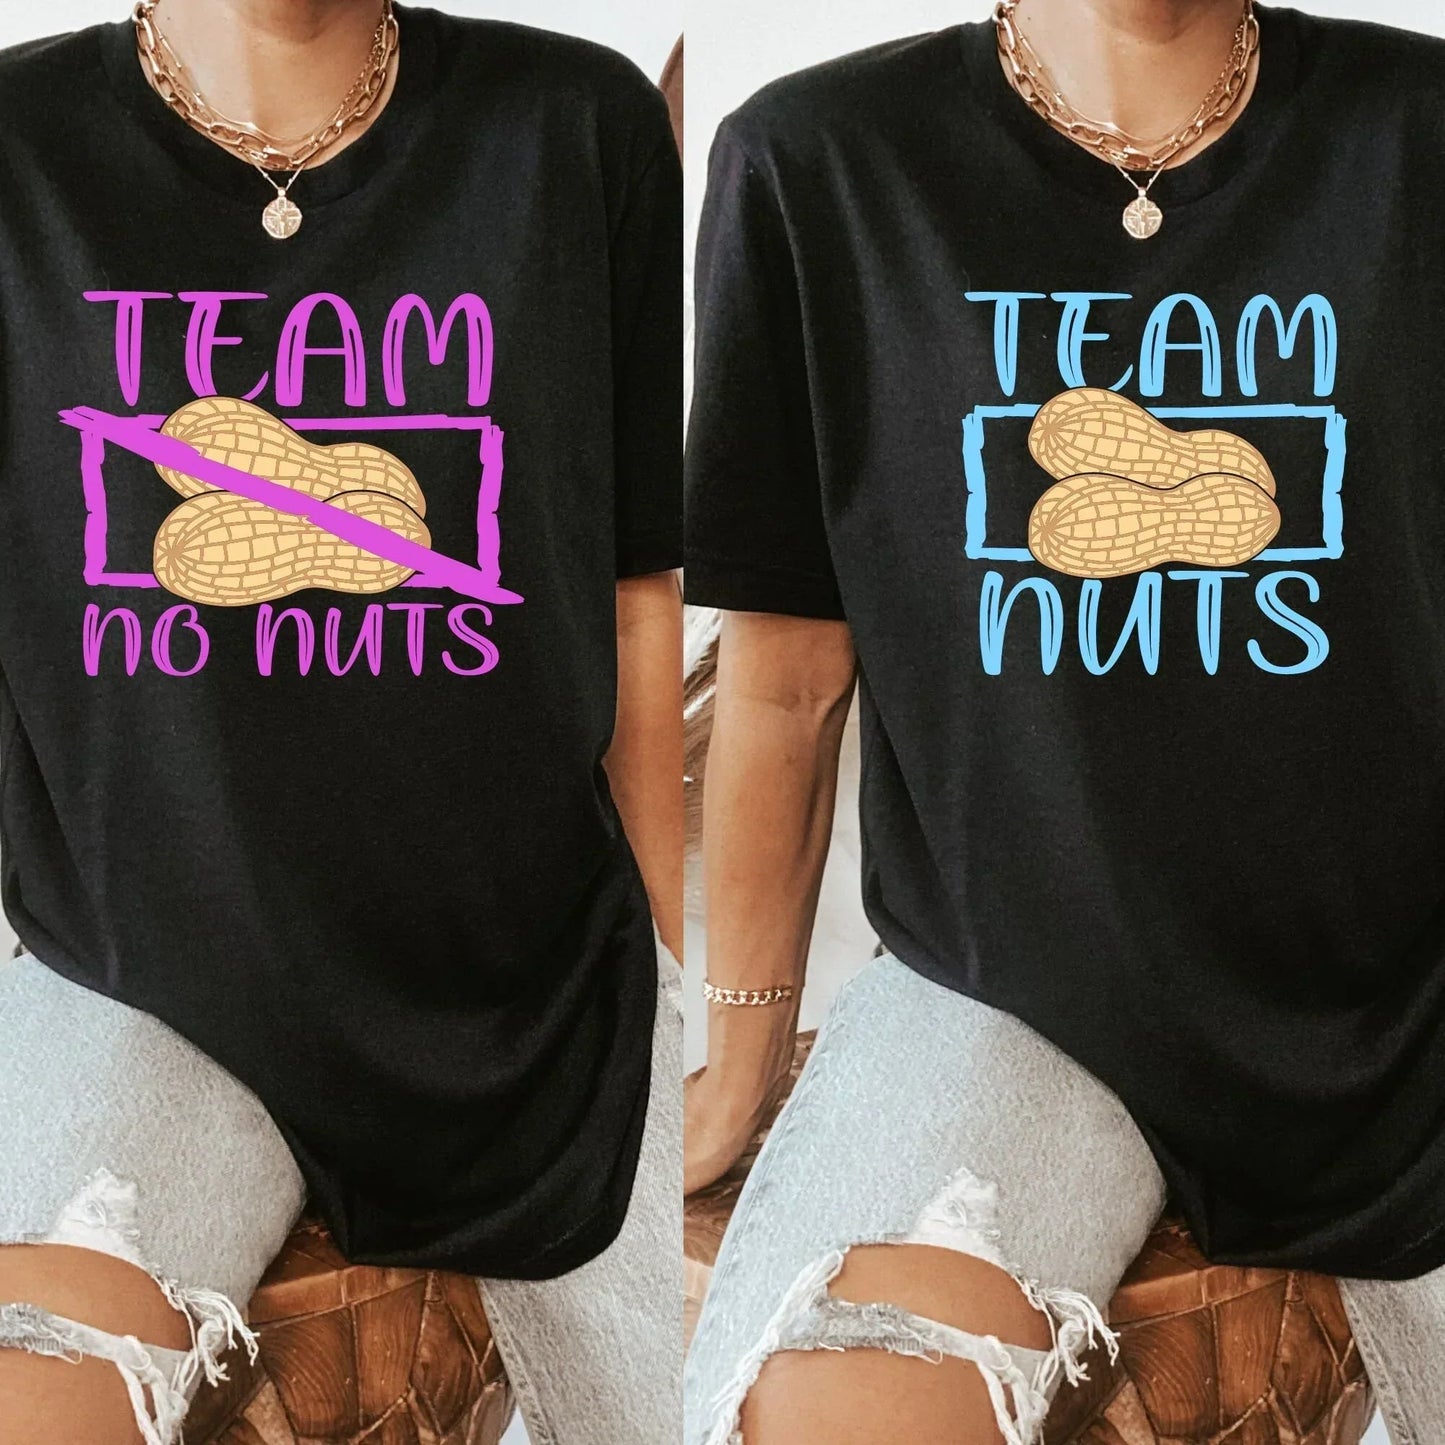 Gender Reveal Shirts, Reveal Group Party T-Shirt, Team Nuts, Team No Nuts, Pregnancy Reveal to Husband, Soon to Be Mom, New Baby Coming Soon